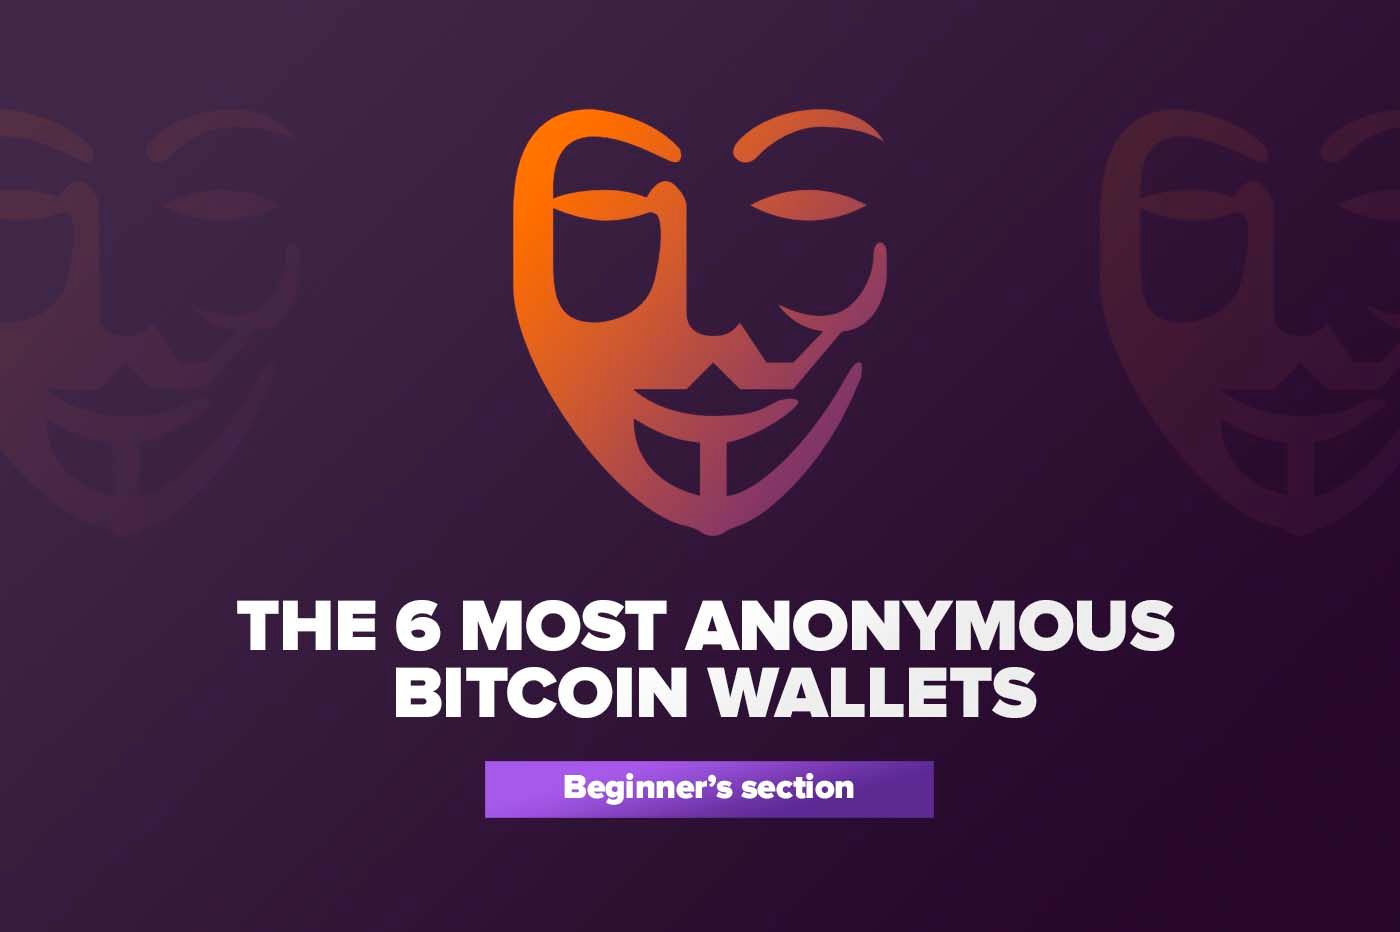 The 6 Most Anonymous Bitcoin Wallets